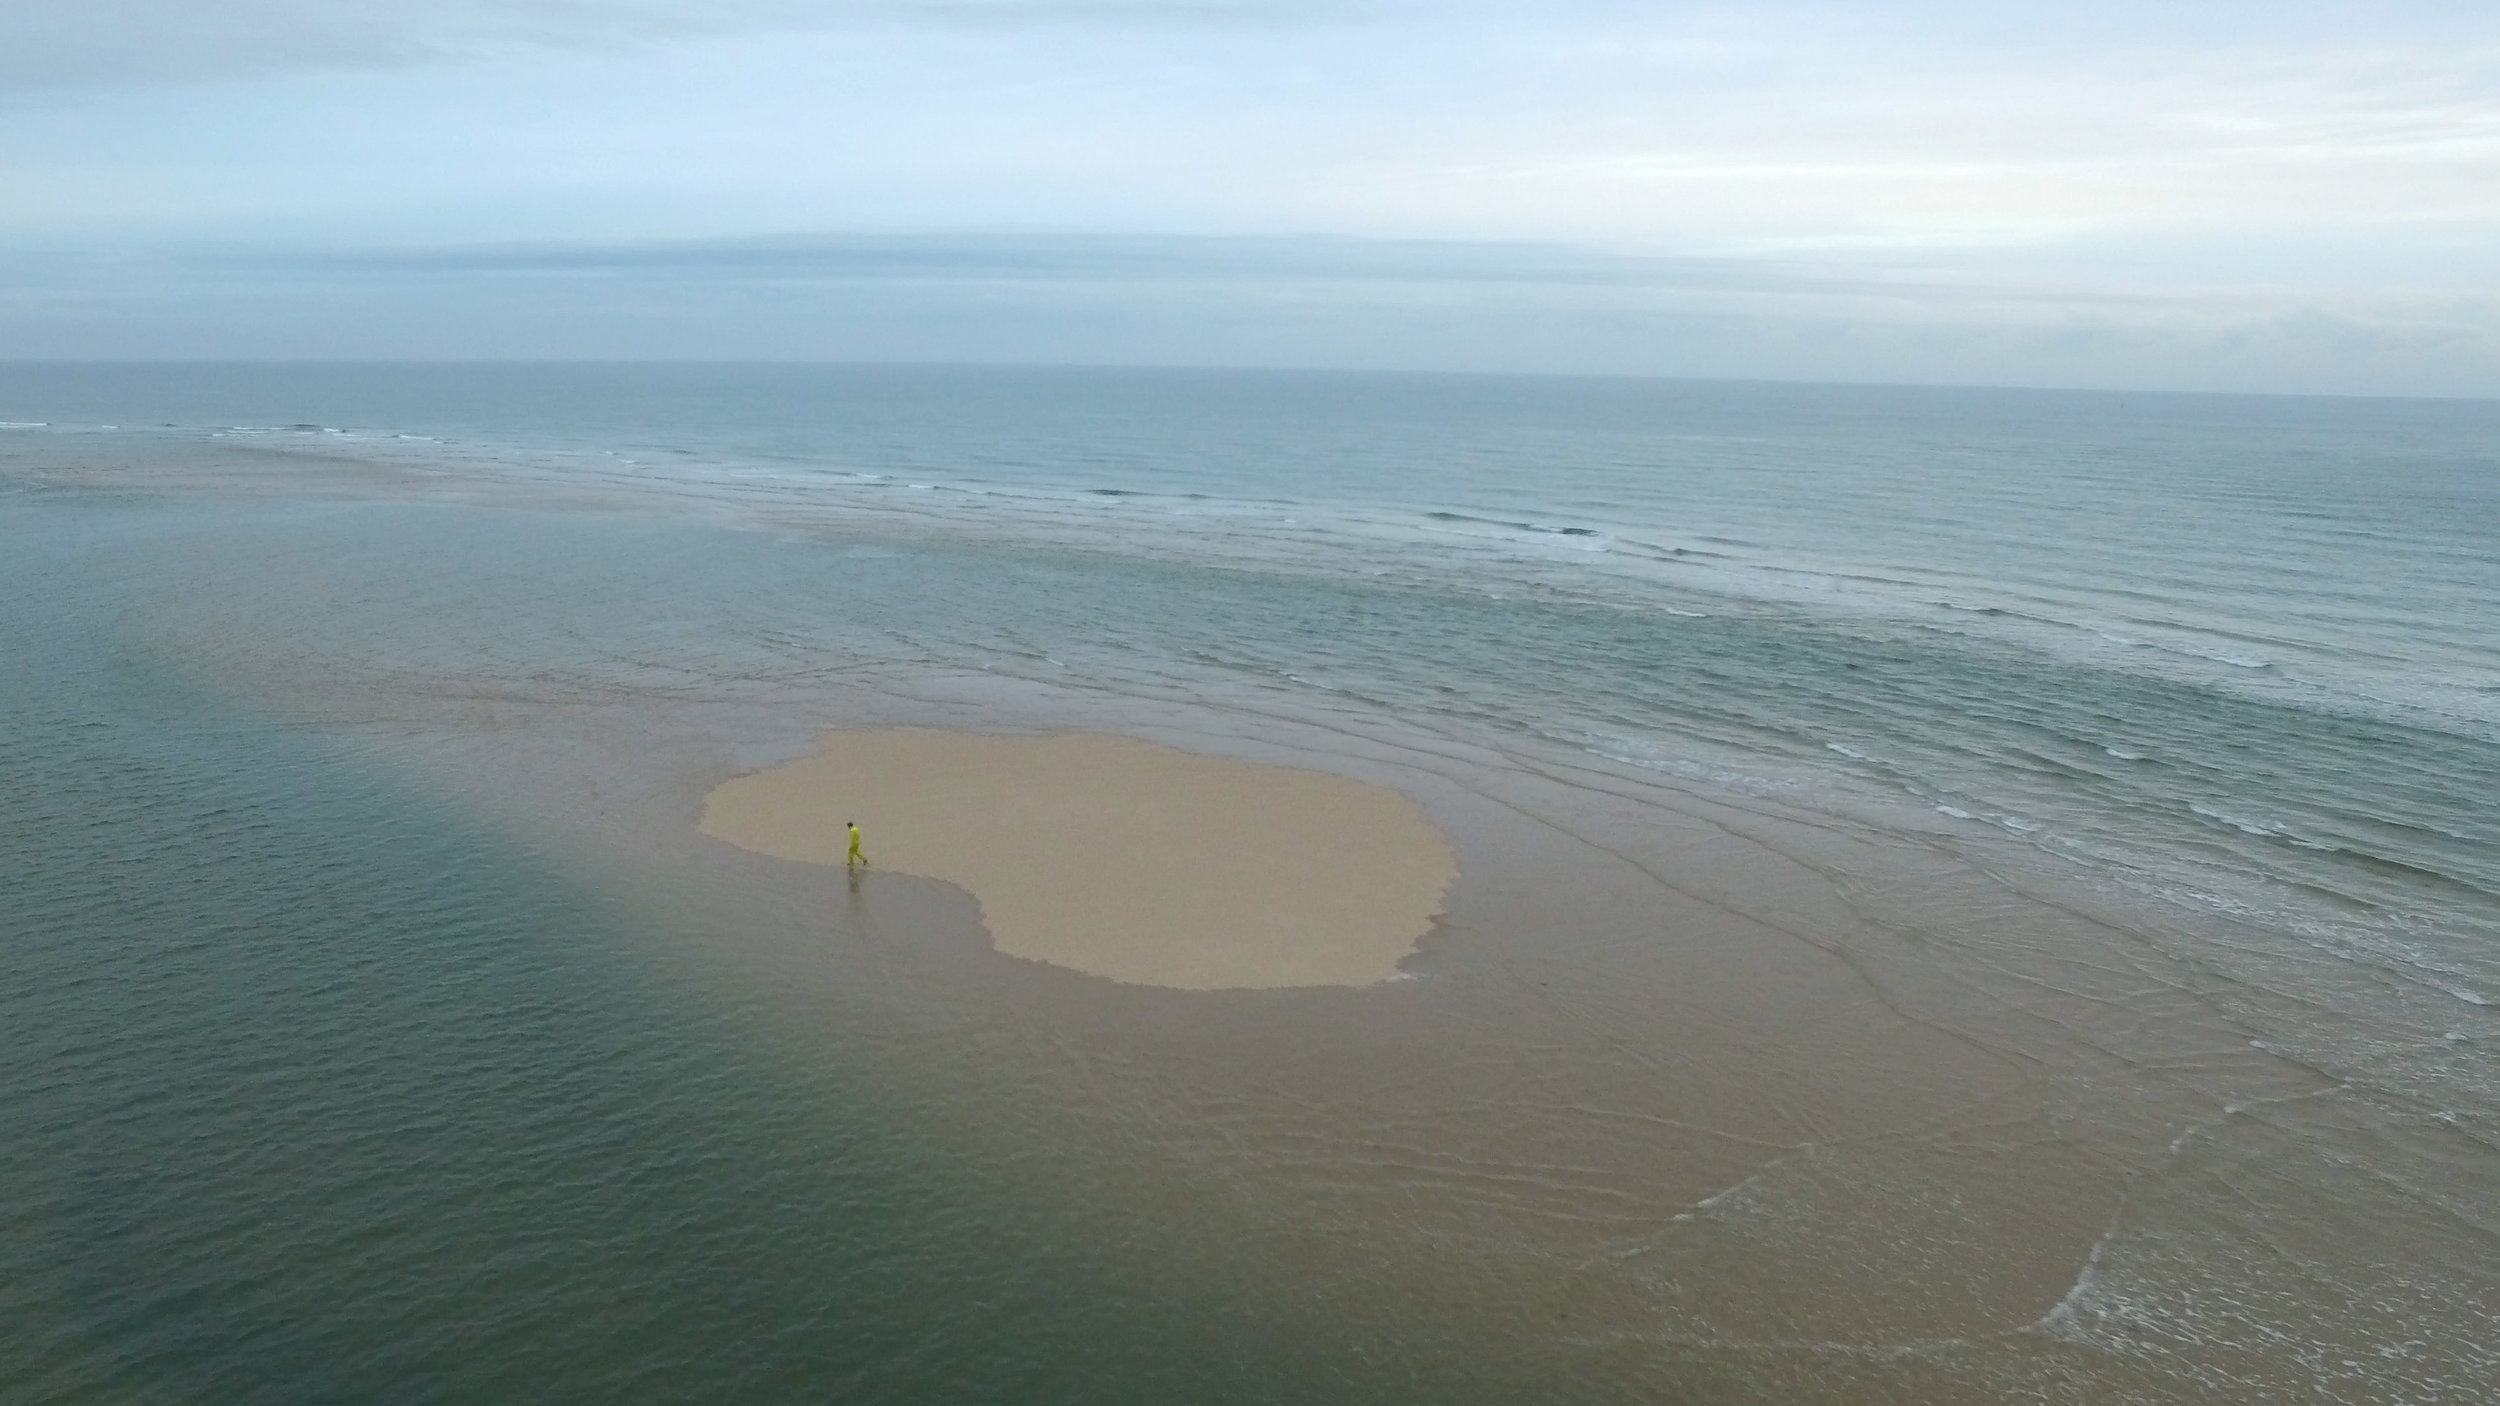  Simon Faithfull’s film, ‘Going Nowhere 1.5’ shows a lone man in a yellow suit walking doggedly around an intertidal island. We see the figure walk around the decreasing space, as the sea expands around him, until the sea is all we see. 